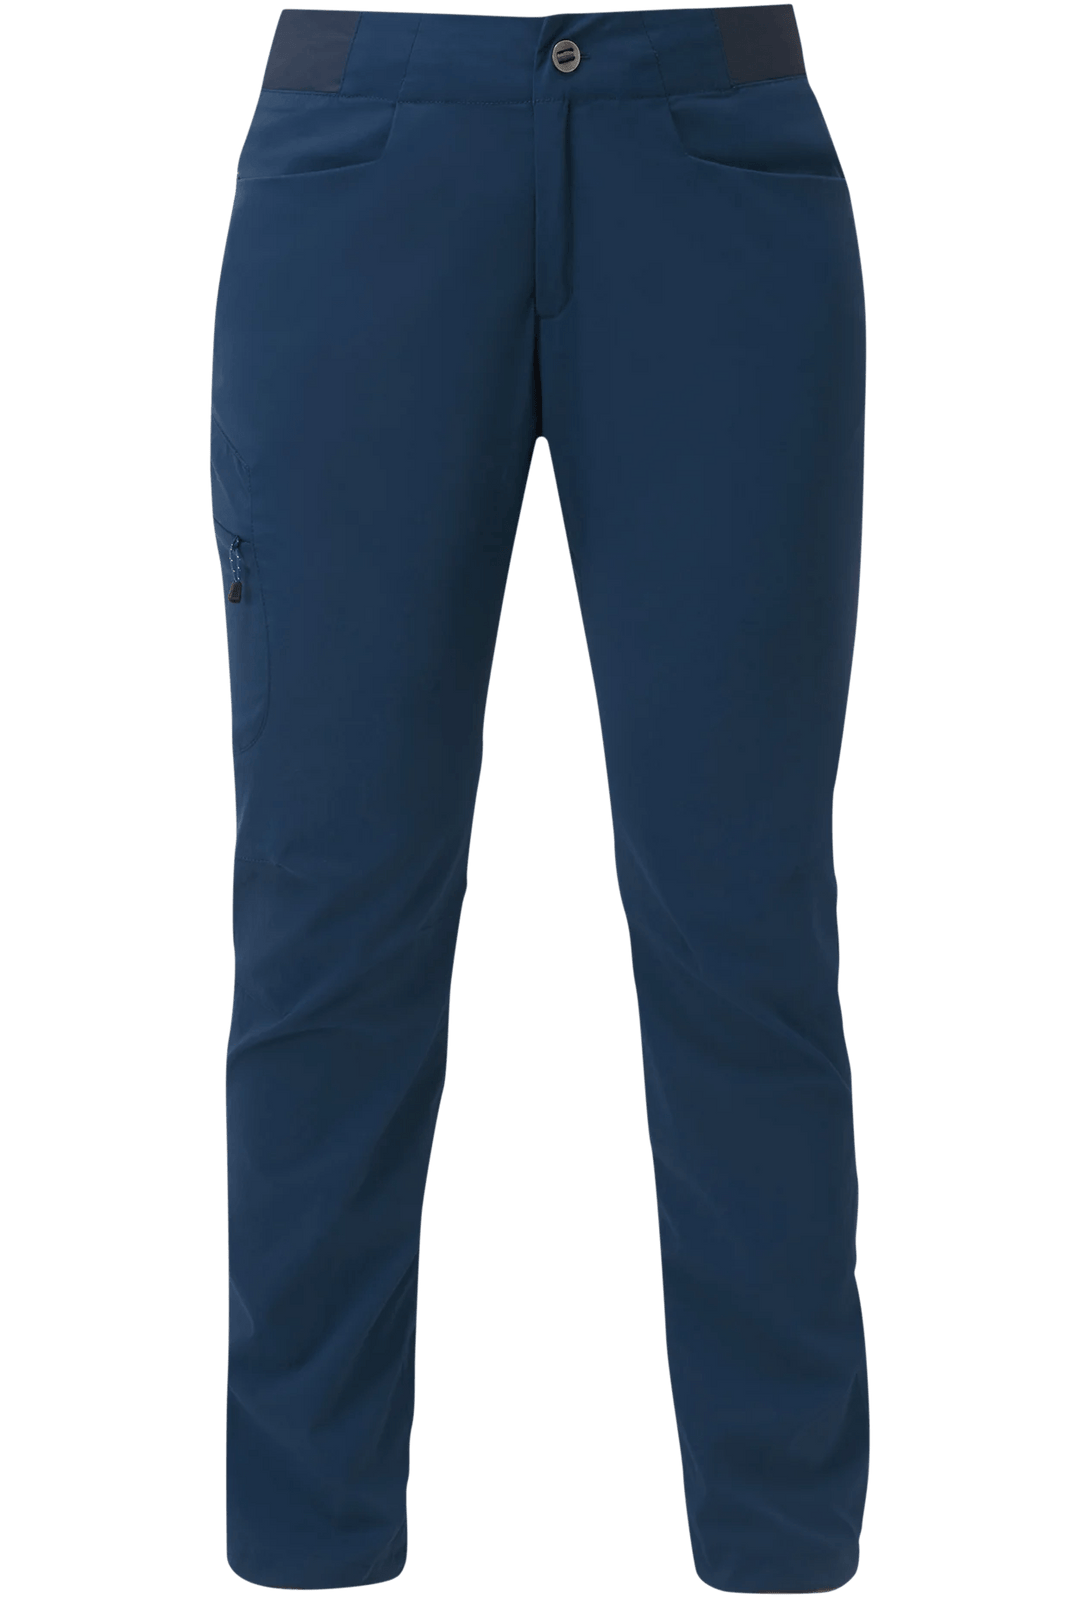 Boone Mountain Sports - W DIHEDRAL PANT